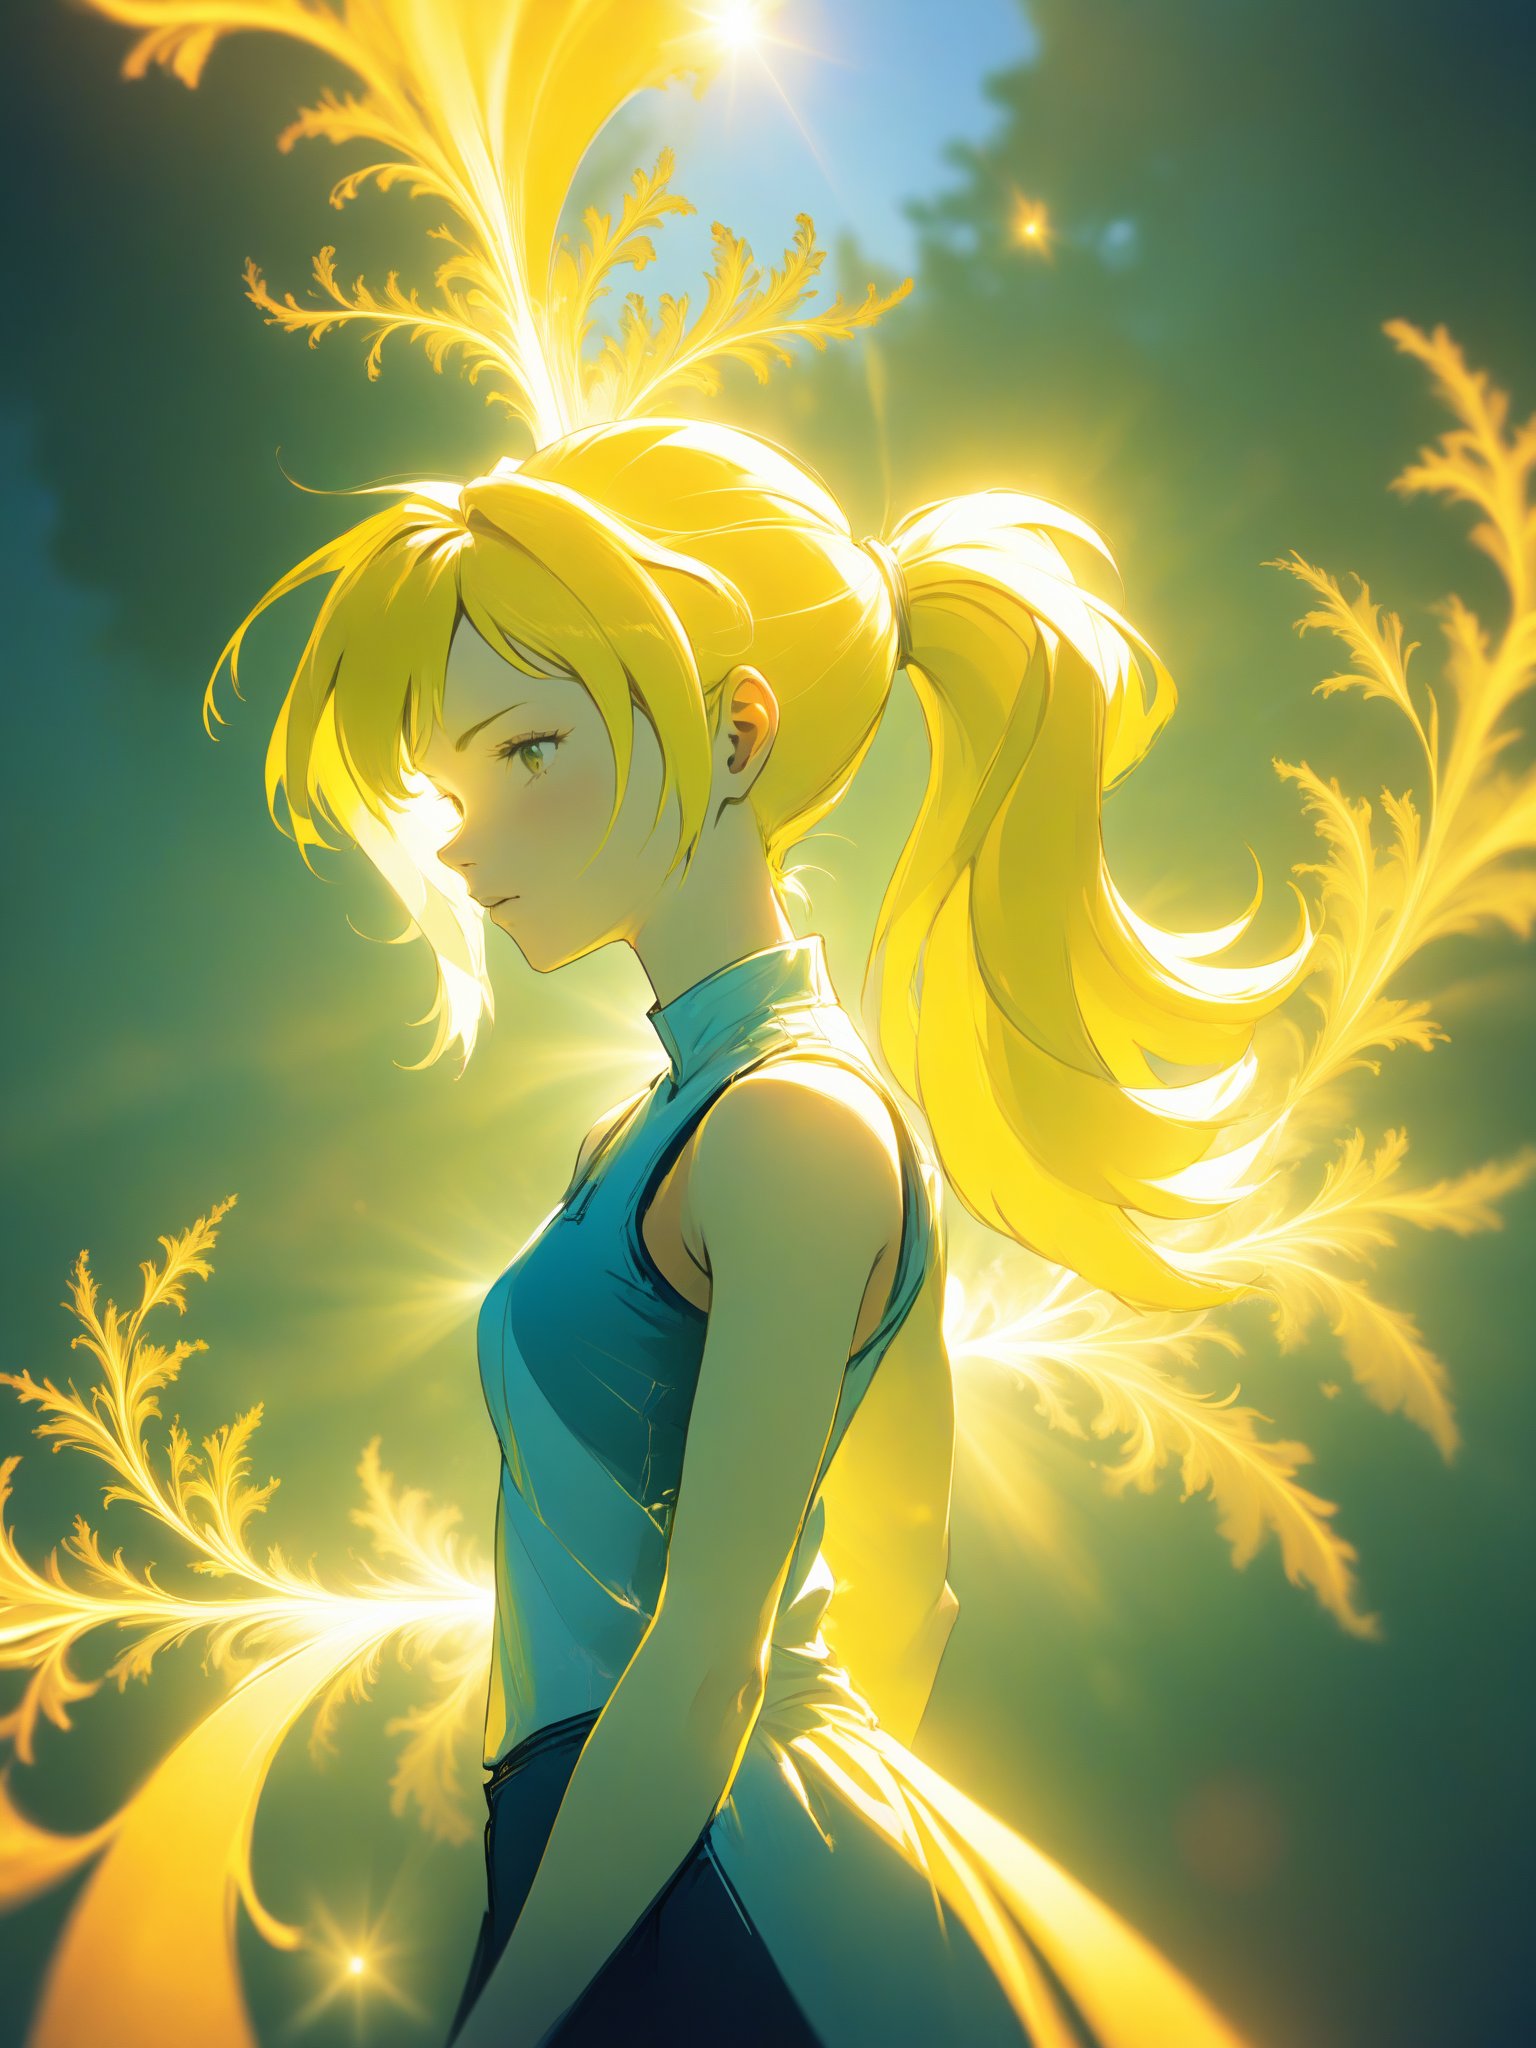 Fractal, Redshift render, summer roots, fit Girl, electric yellow hair styled as ponytail, Sketch, Lens Flare, Fujifilm Superia